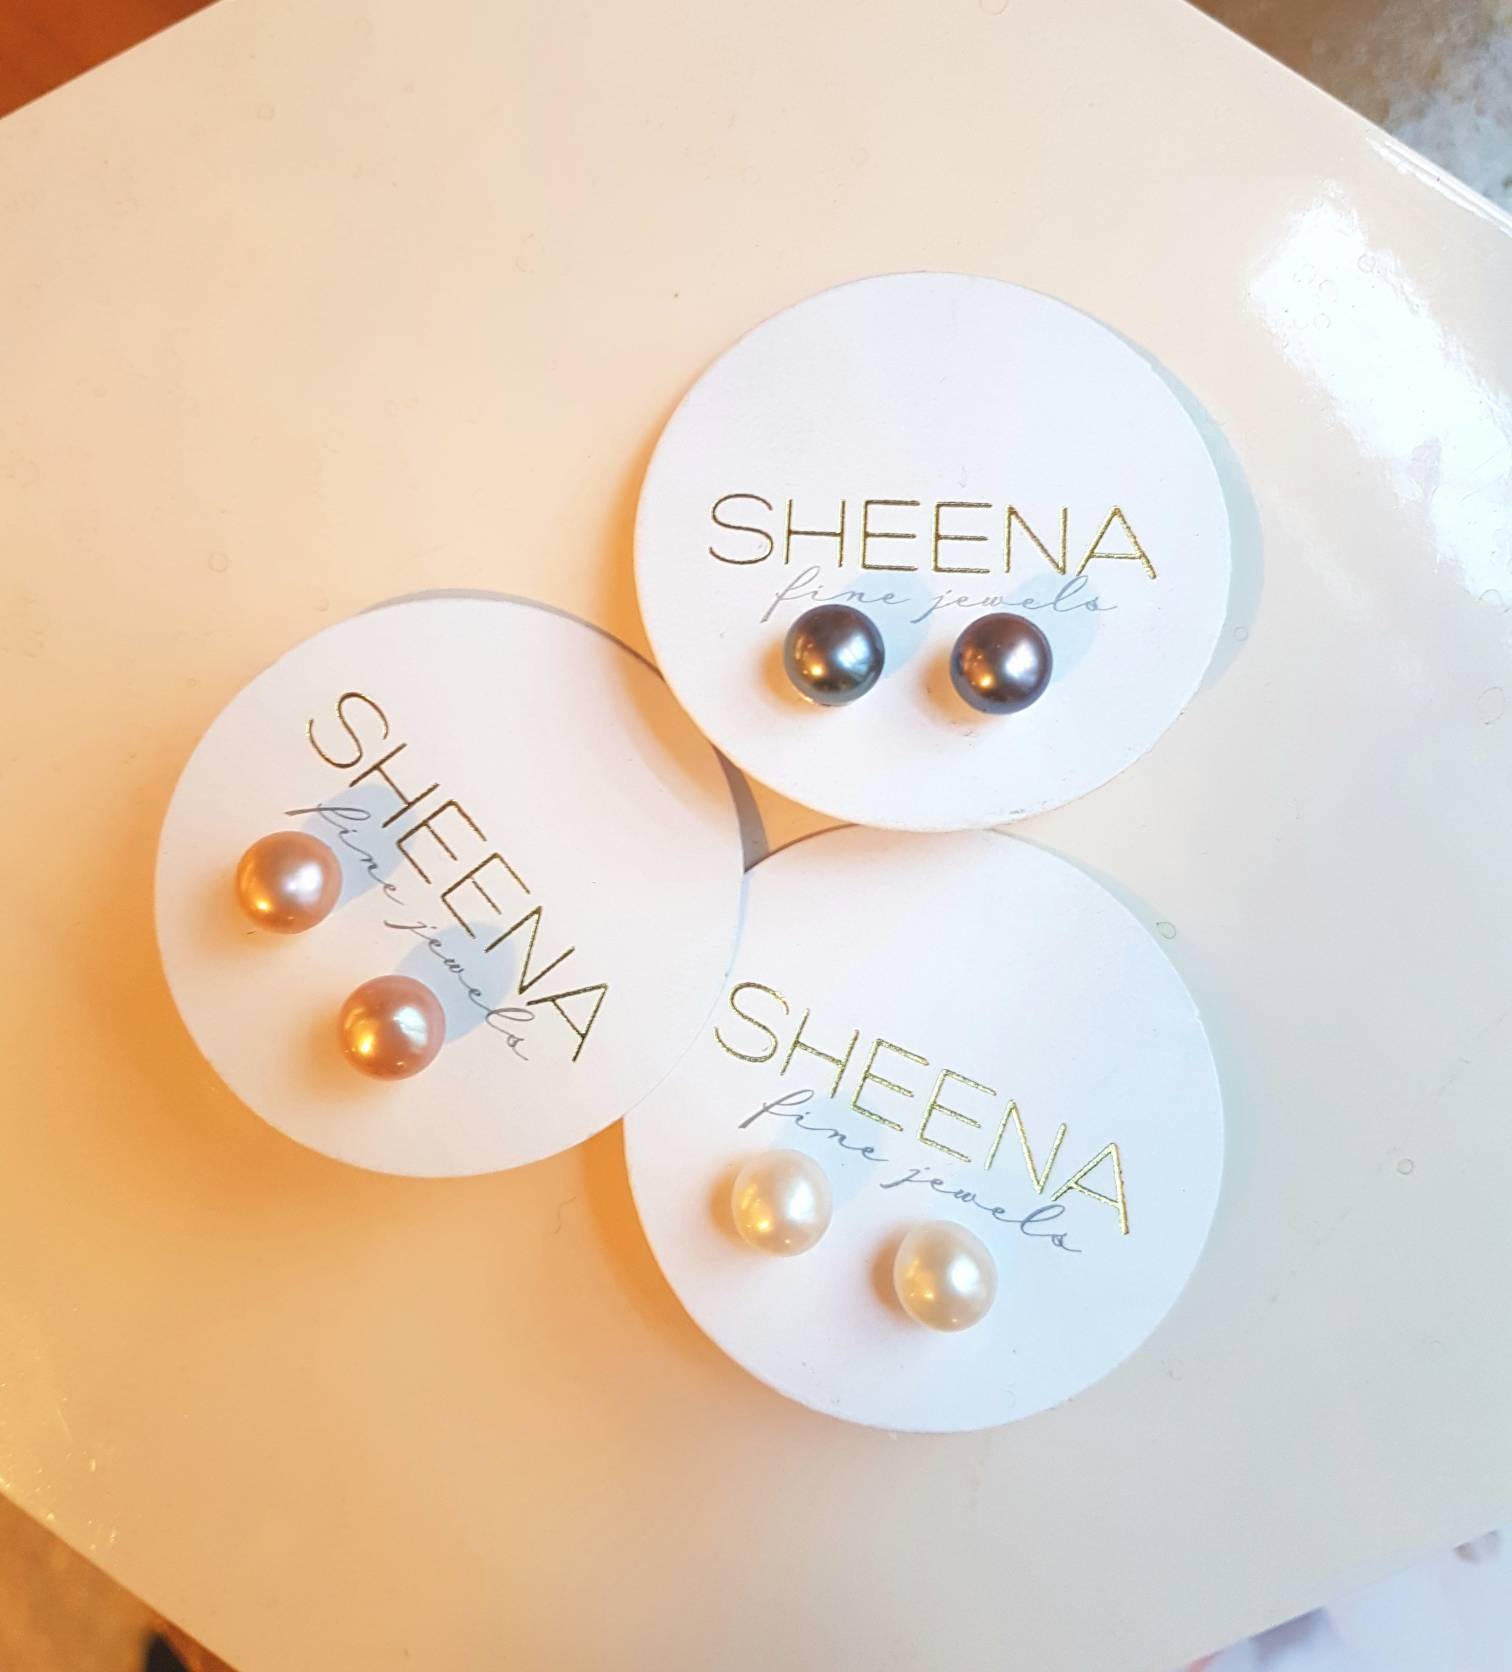 Pearl stud earrings on Sterling silver or 14k gold filled posts